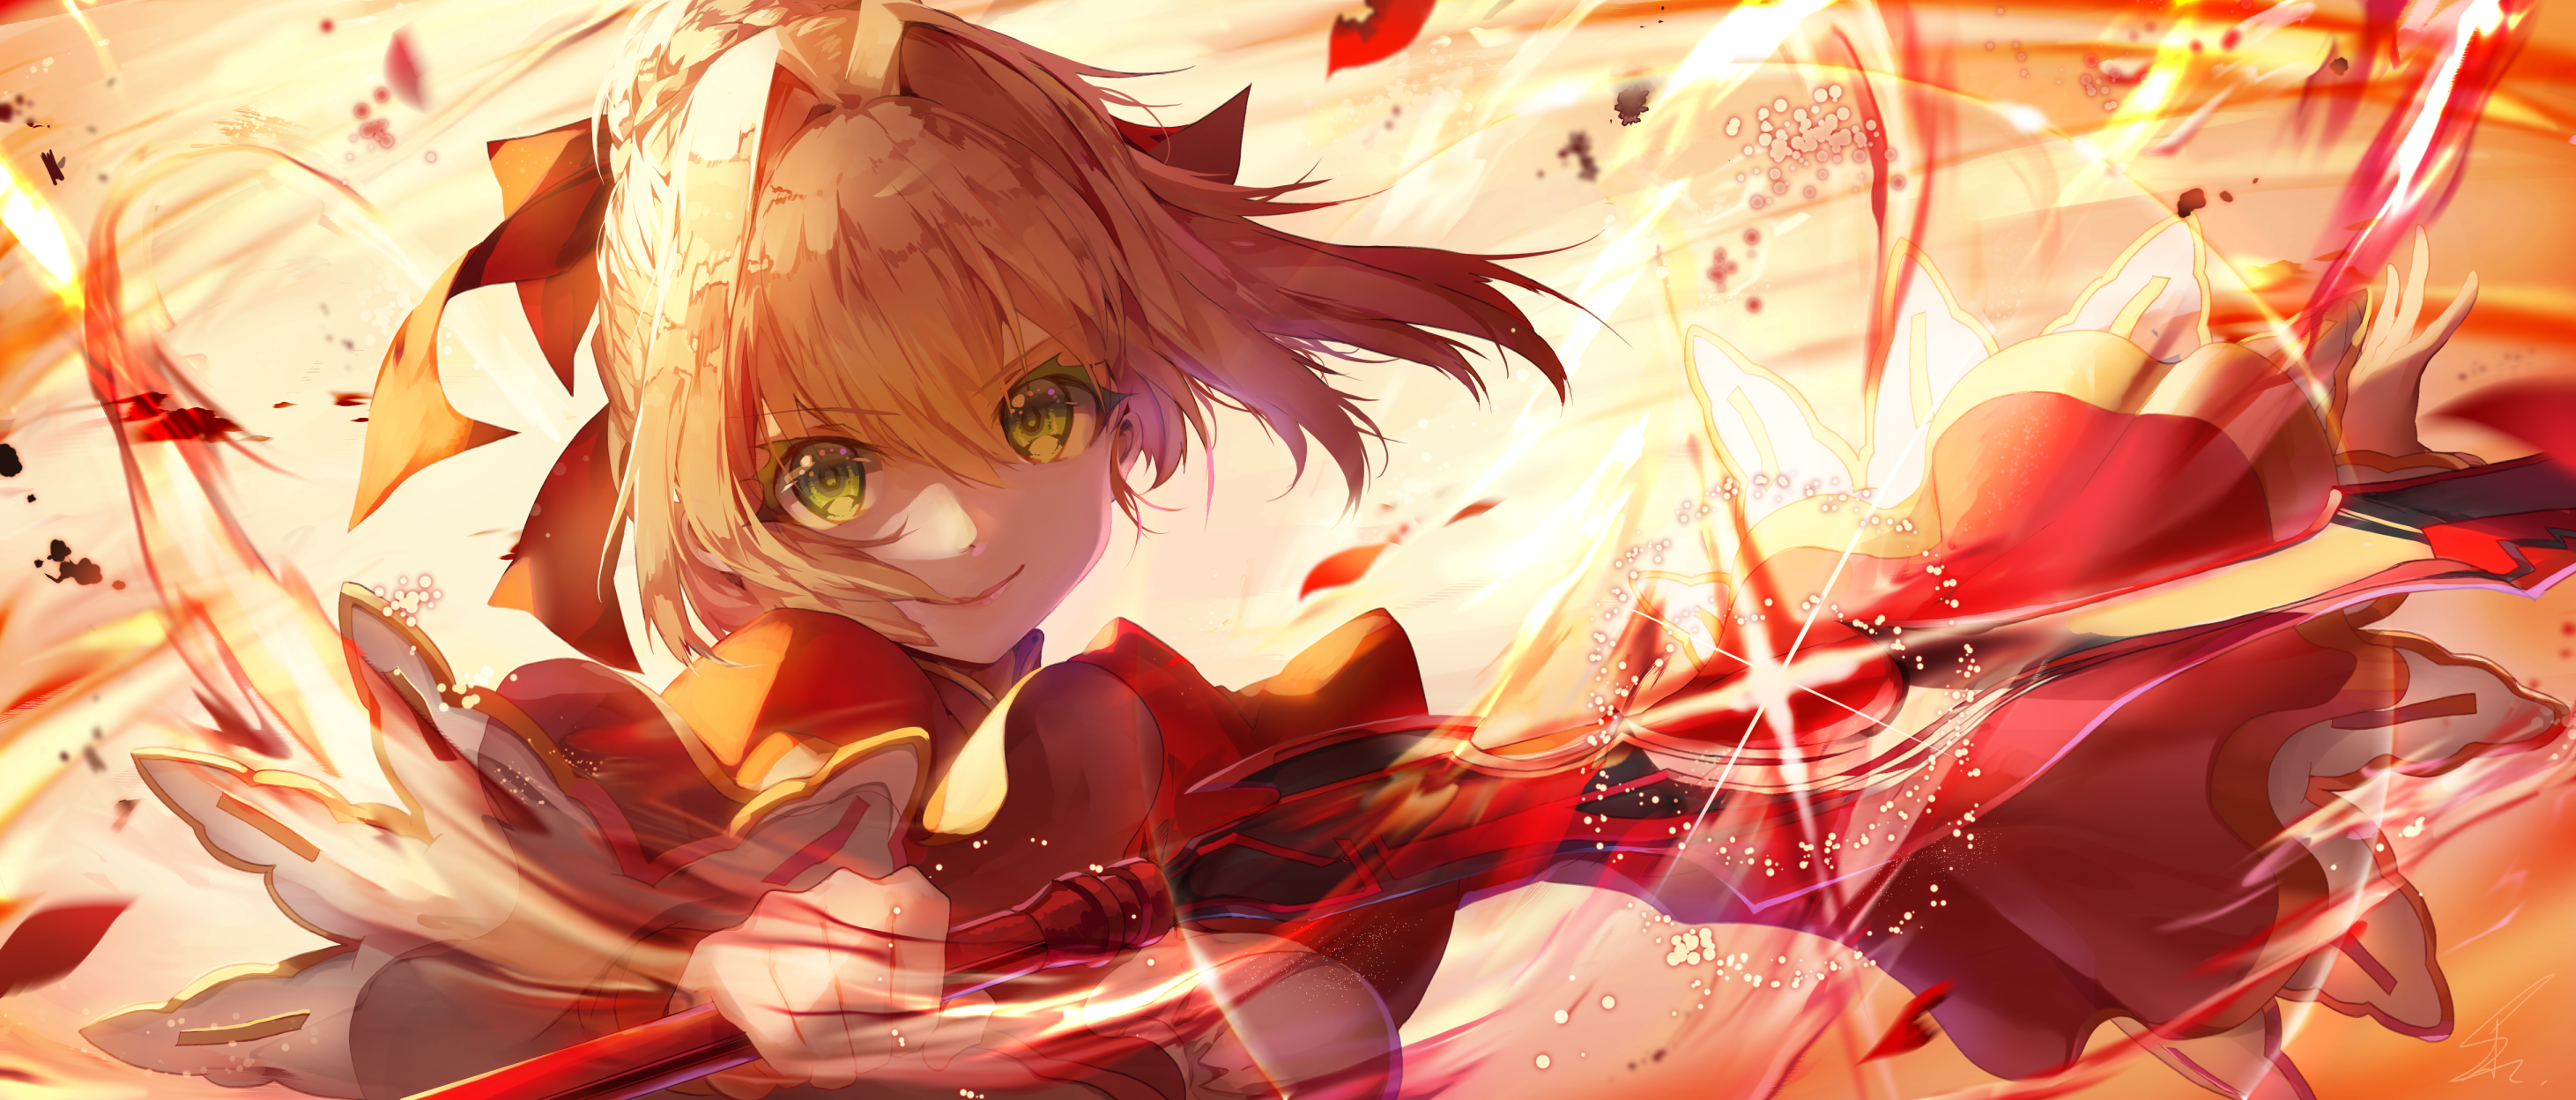 Anime Anime Girls Fate Stay Night Fate Grand Order Saber Sword Green Eyes Fate Series Fantasy Girl S 2923x1248